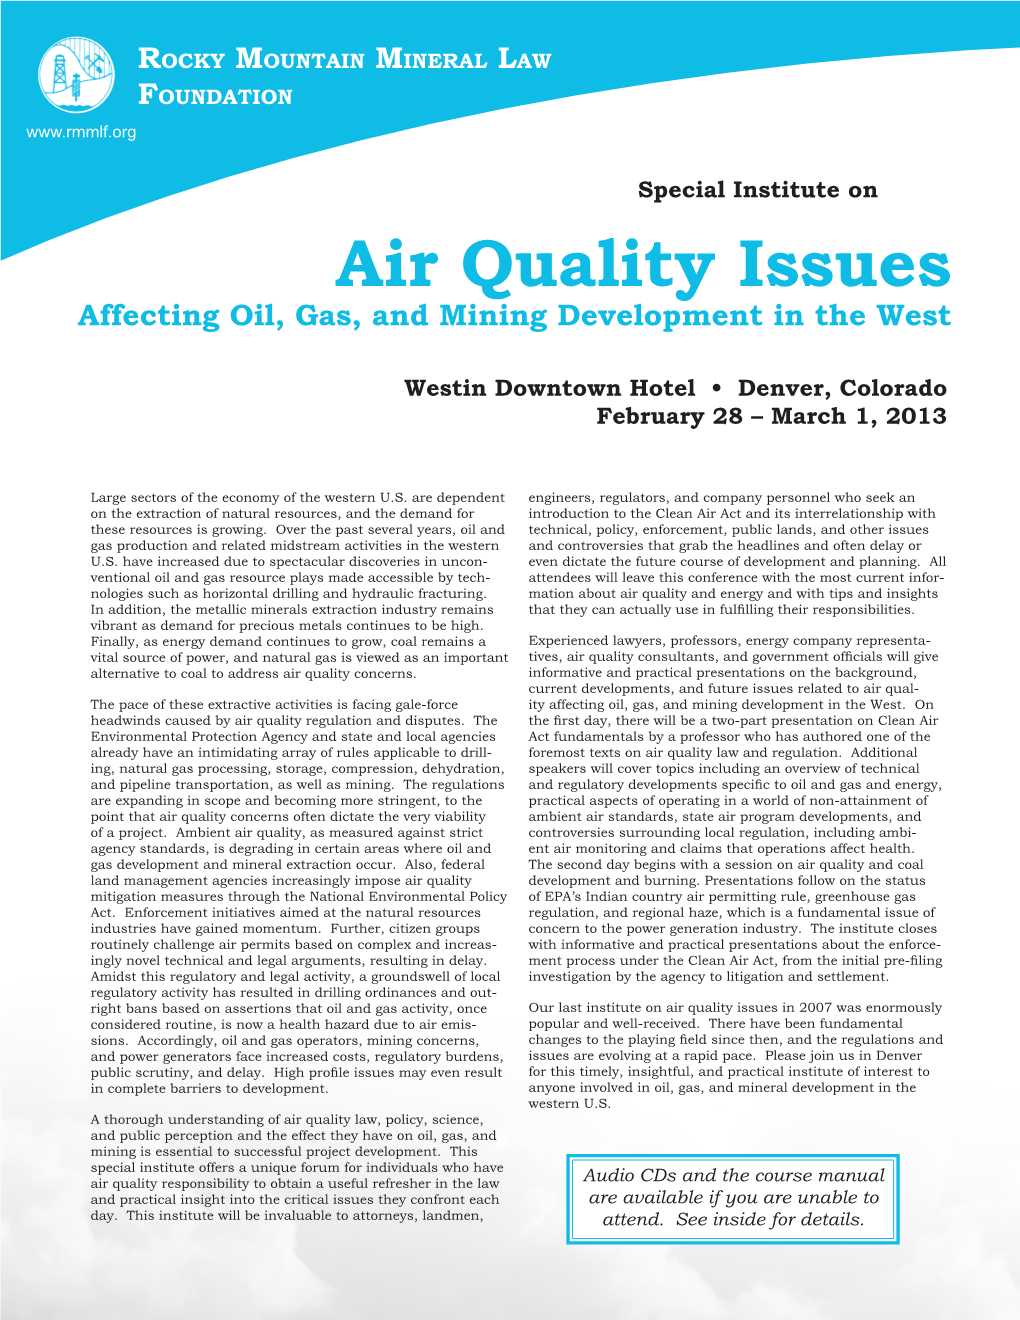 Air Quality Issues Affecting Oil, Gas, and Mining Development in the West